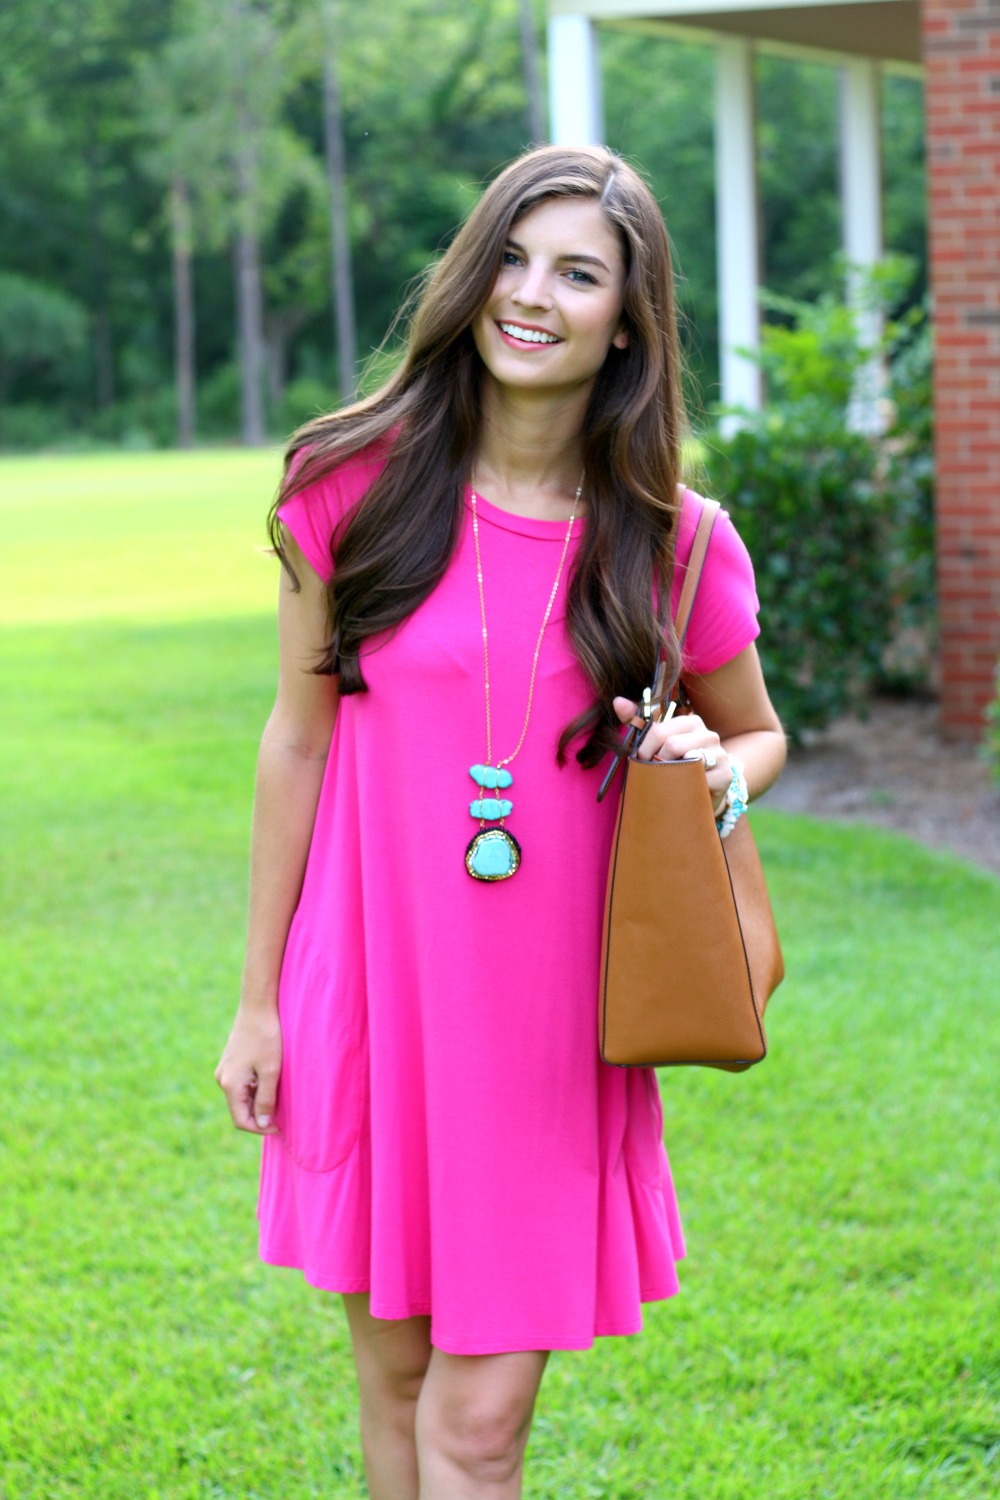 Chasing Abigail Lee : The Comfiest Little Pink Dress